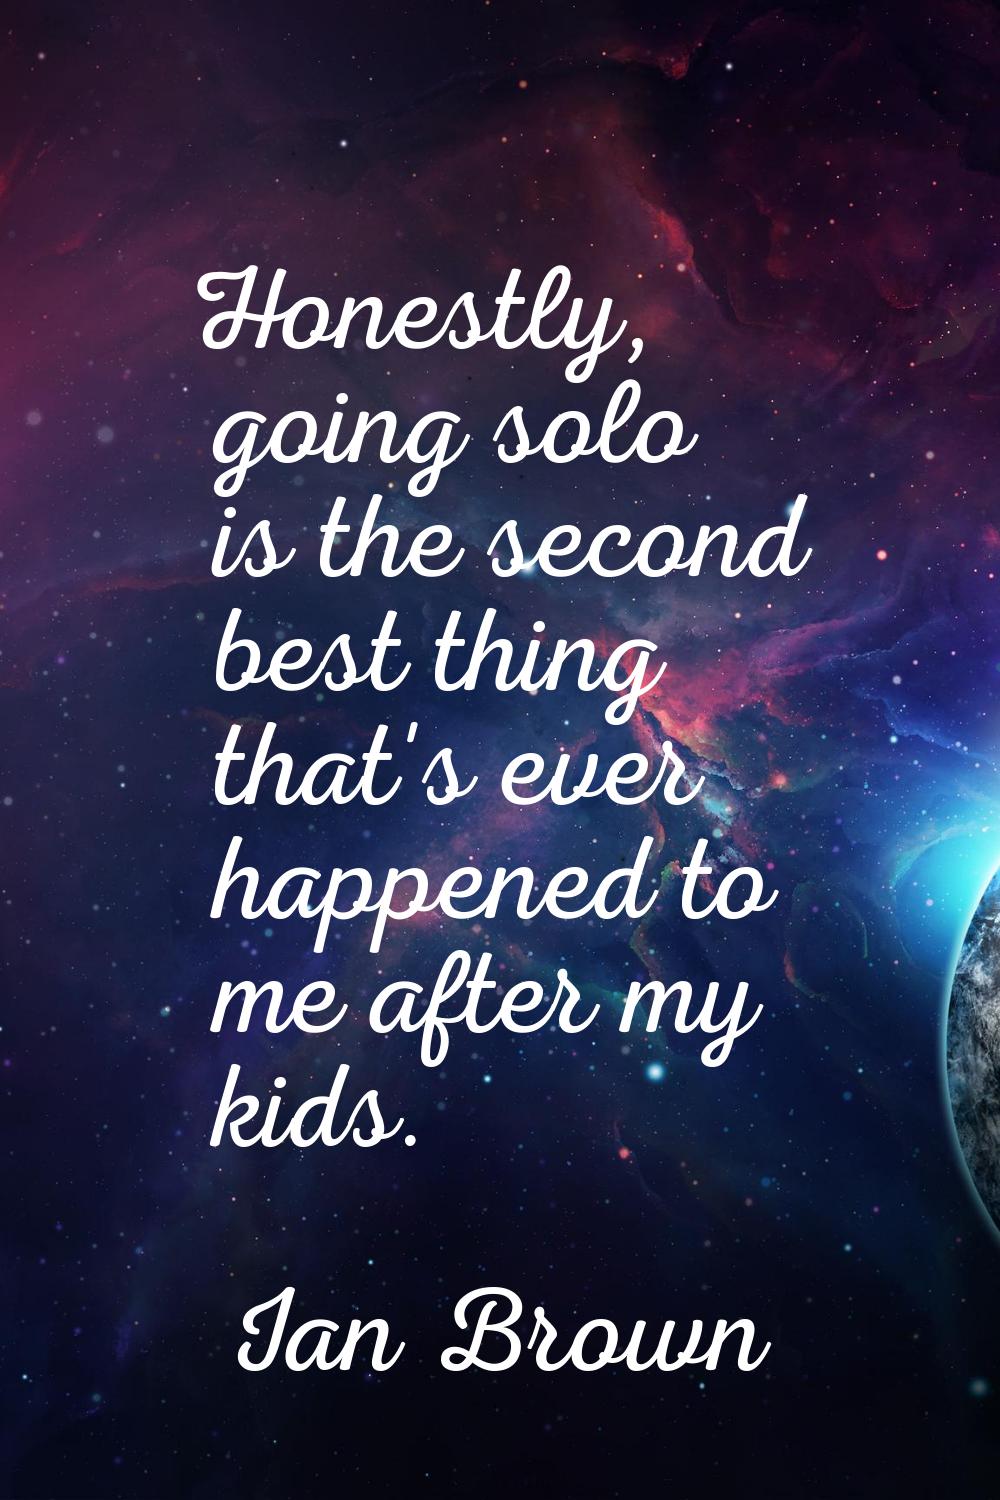 Honestly, going solo is the second best thing that's ever happened to me after my kids.